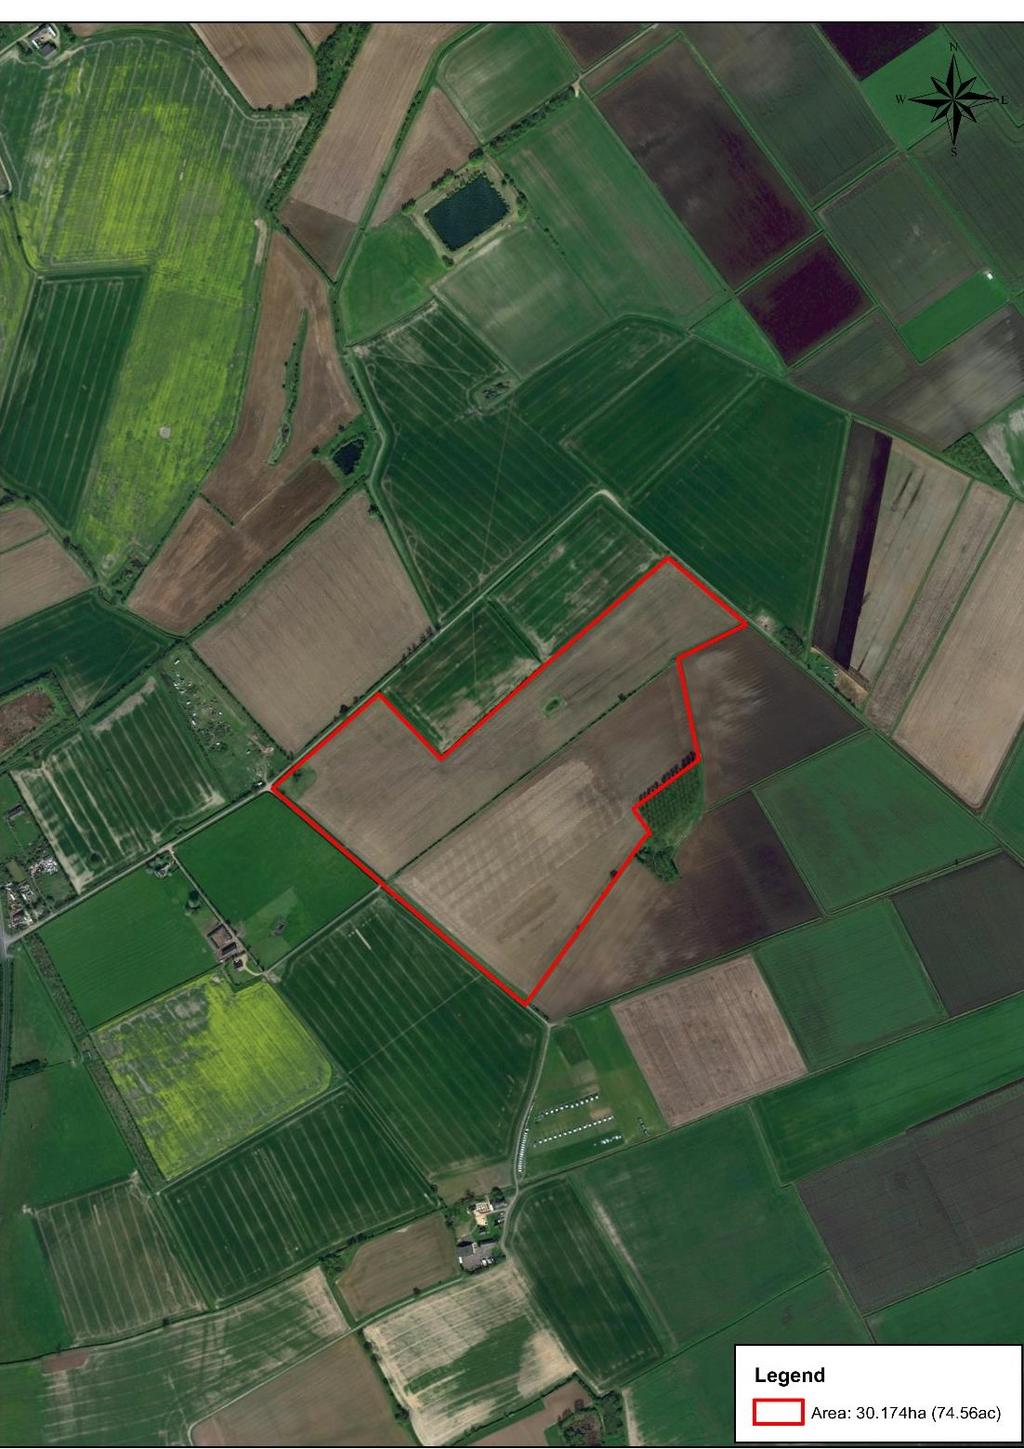 An opportunity to purchase two adjoining parcels of arable land, located close to the village of Stilton and within easy reach of the A1(M). In all 30.174 hectares (74.